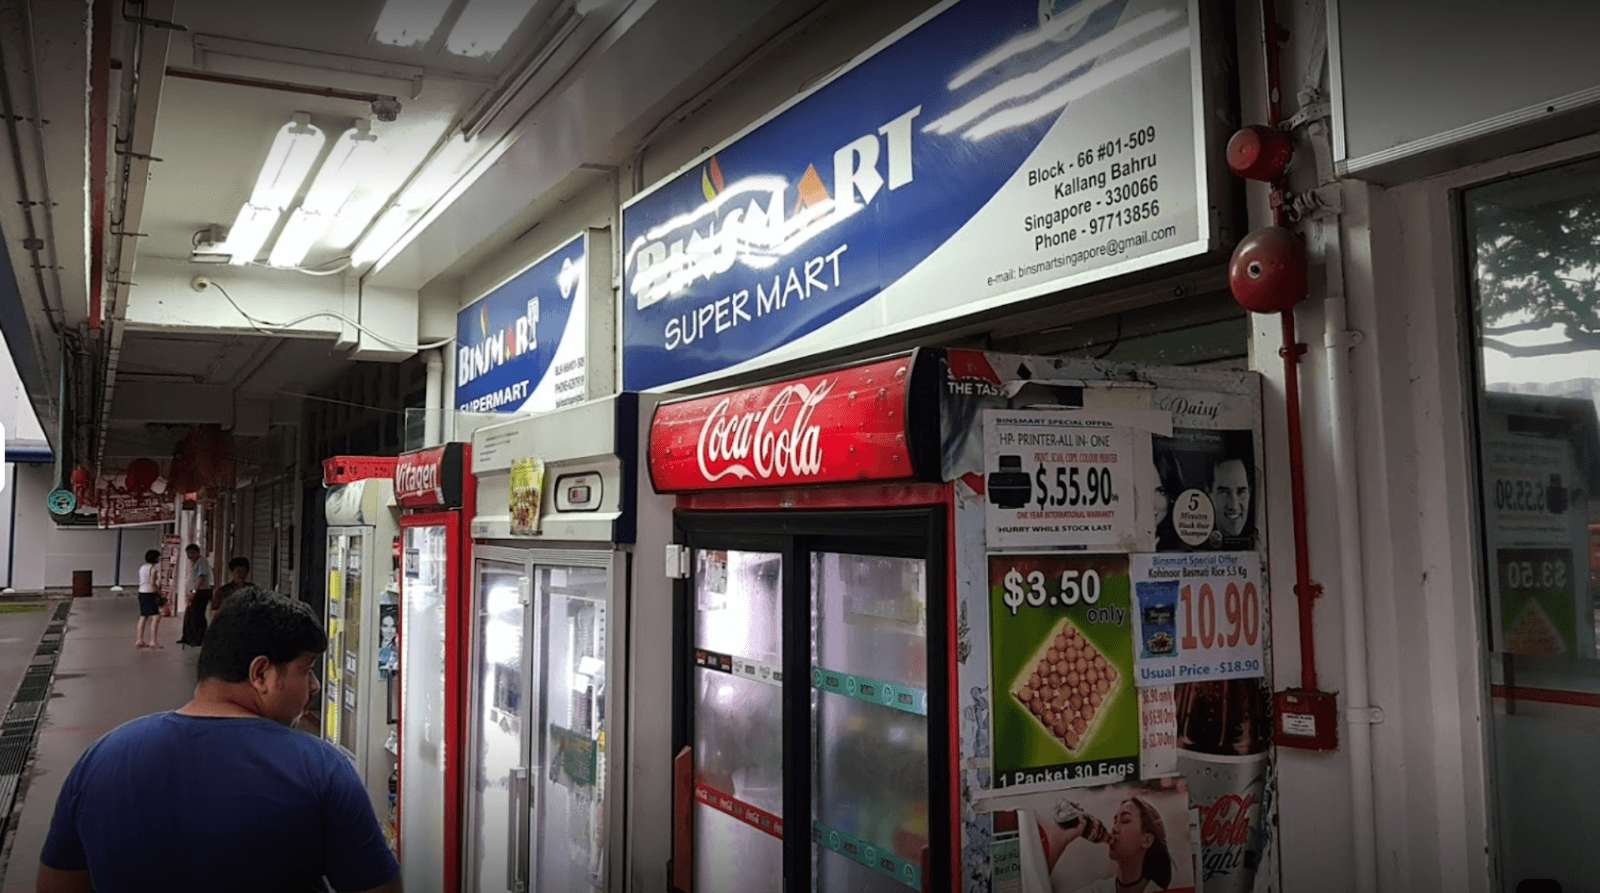 (Expired)Busy Mini Mart / Convenience Store For Sale.